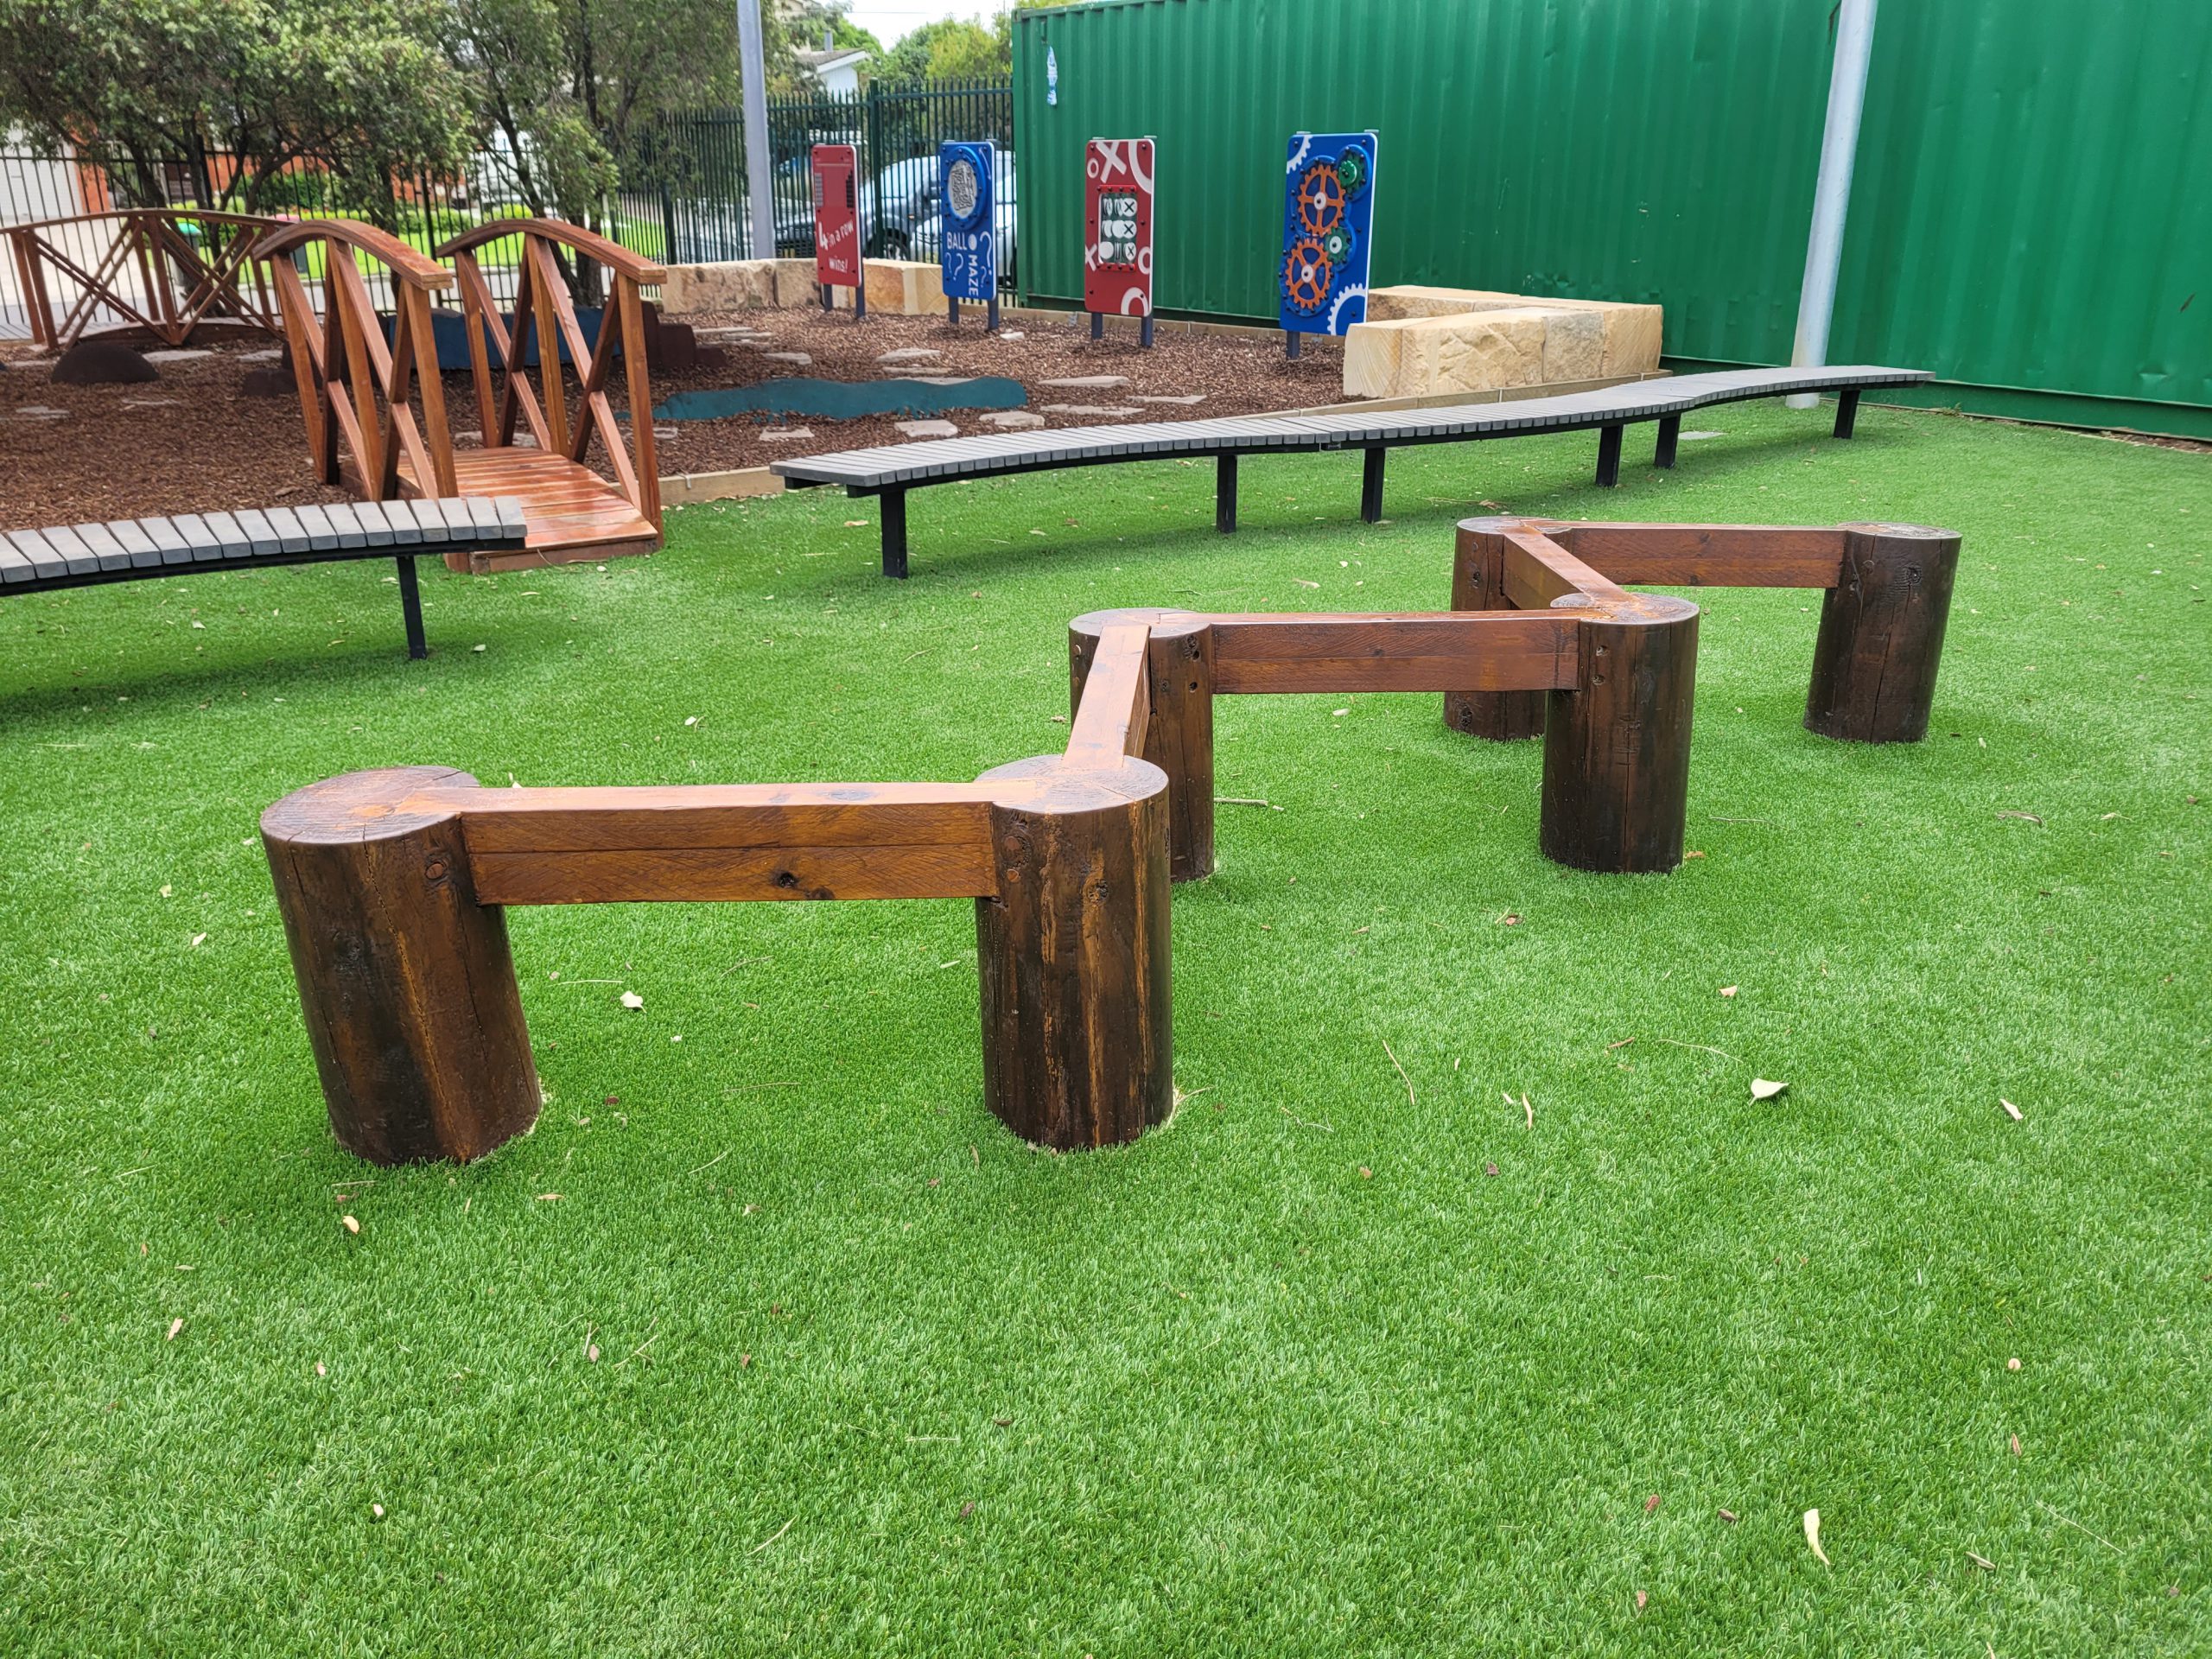 Balance beam installed on synthetic grass in an outdoor playground